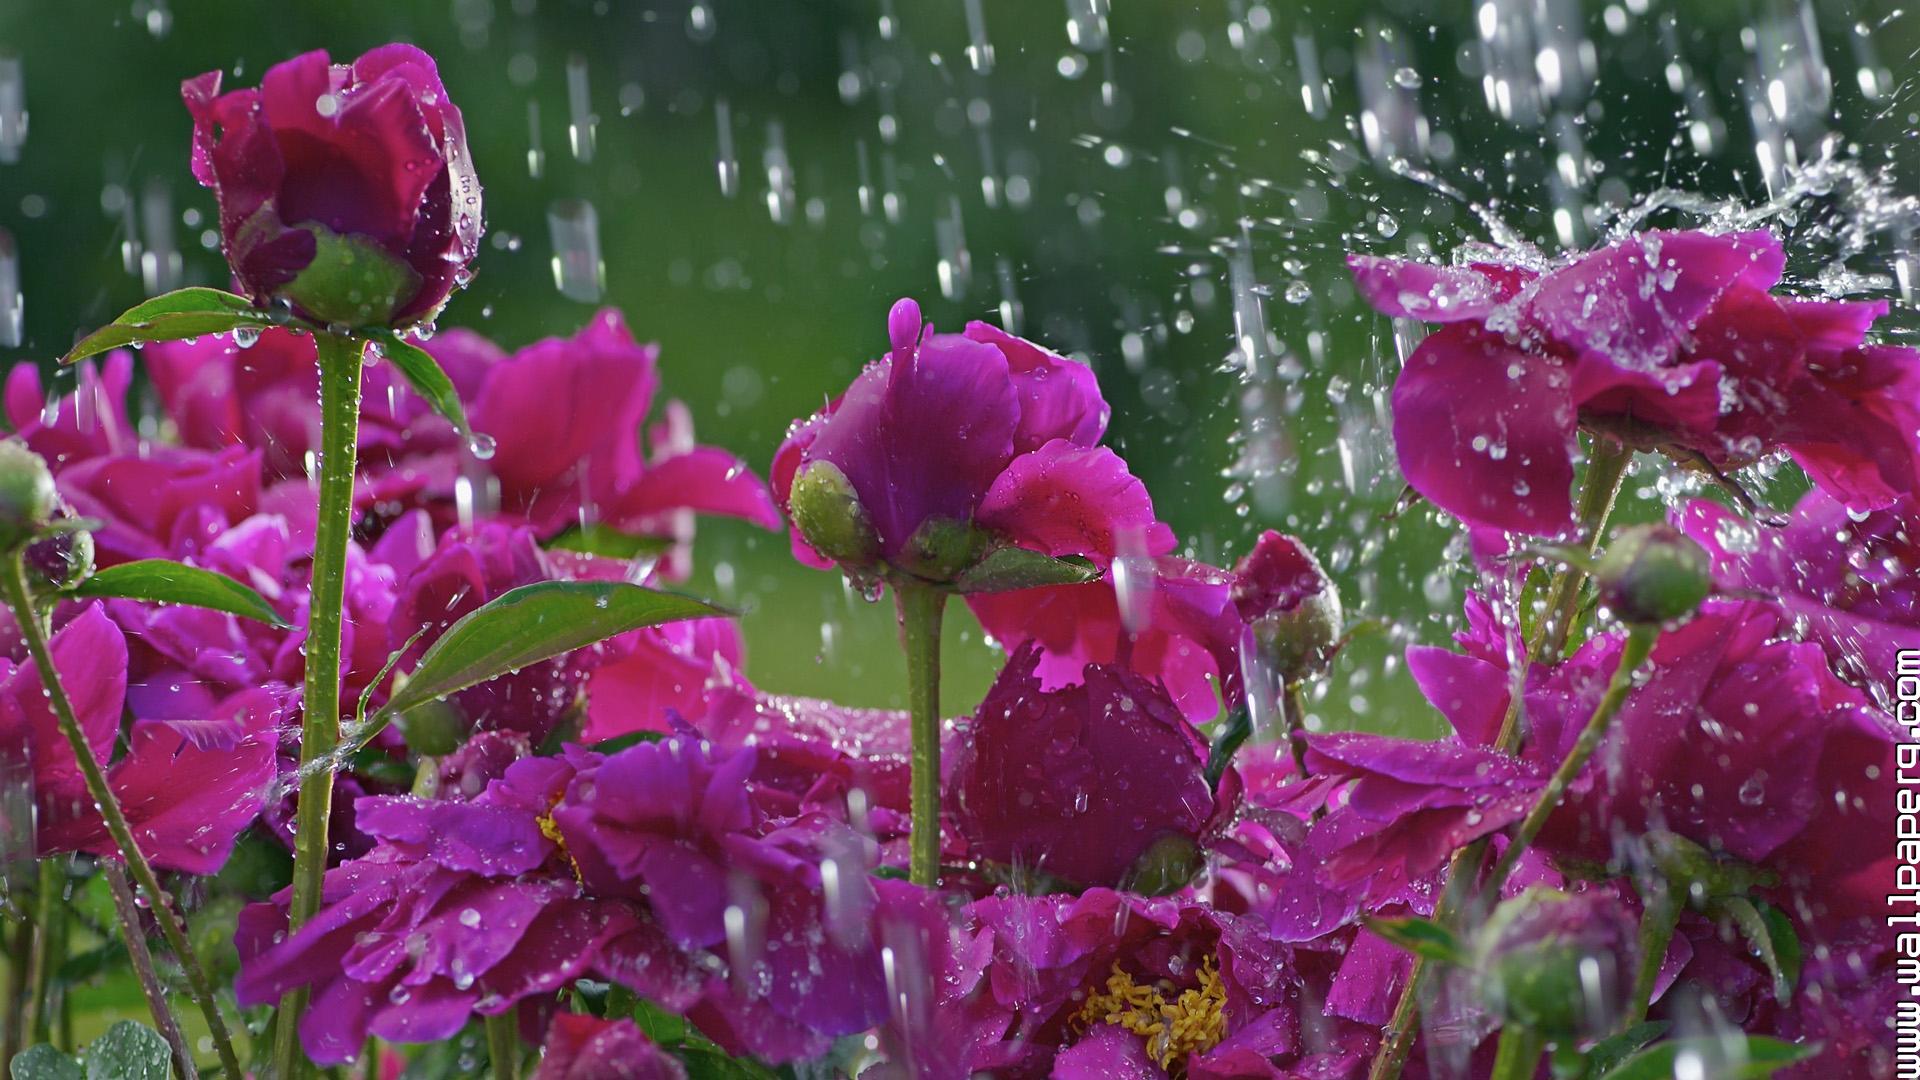 Download Beautiful blossoms in rain - Hd monsoon images for your mobile  cell phone